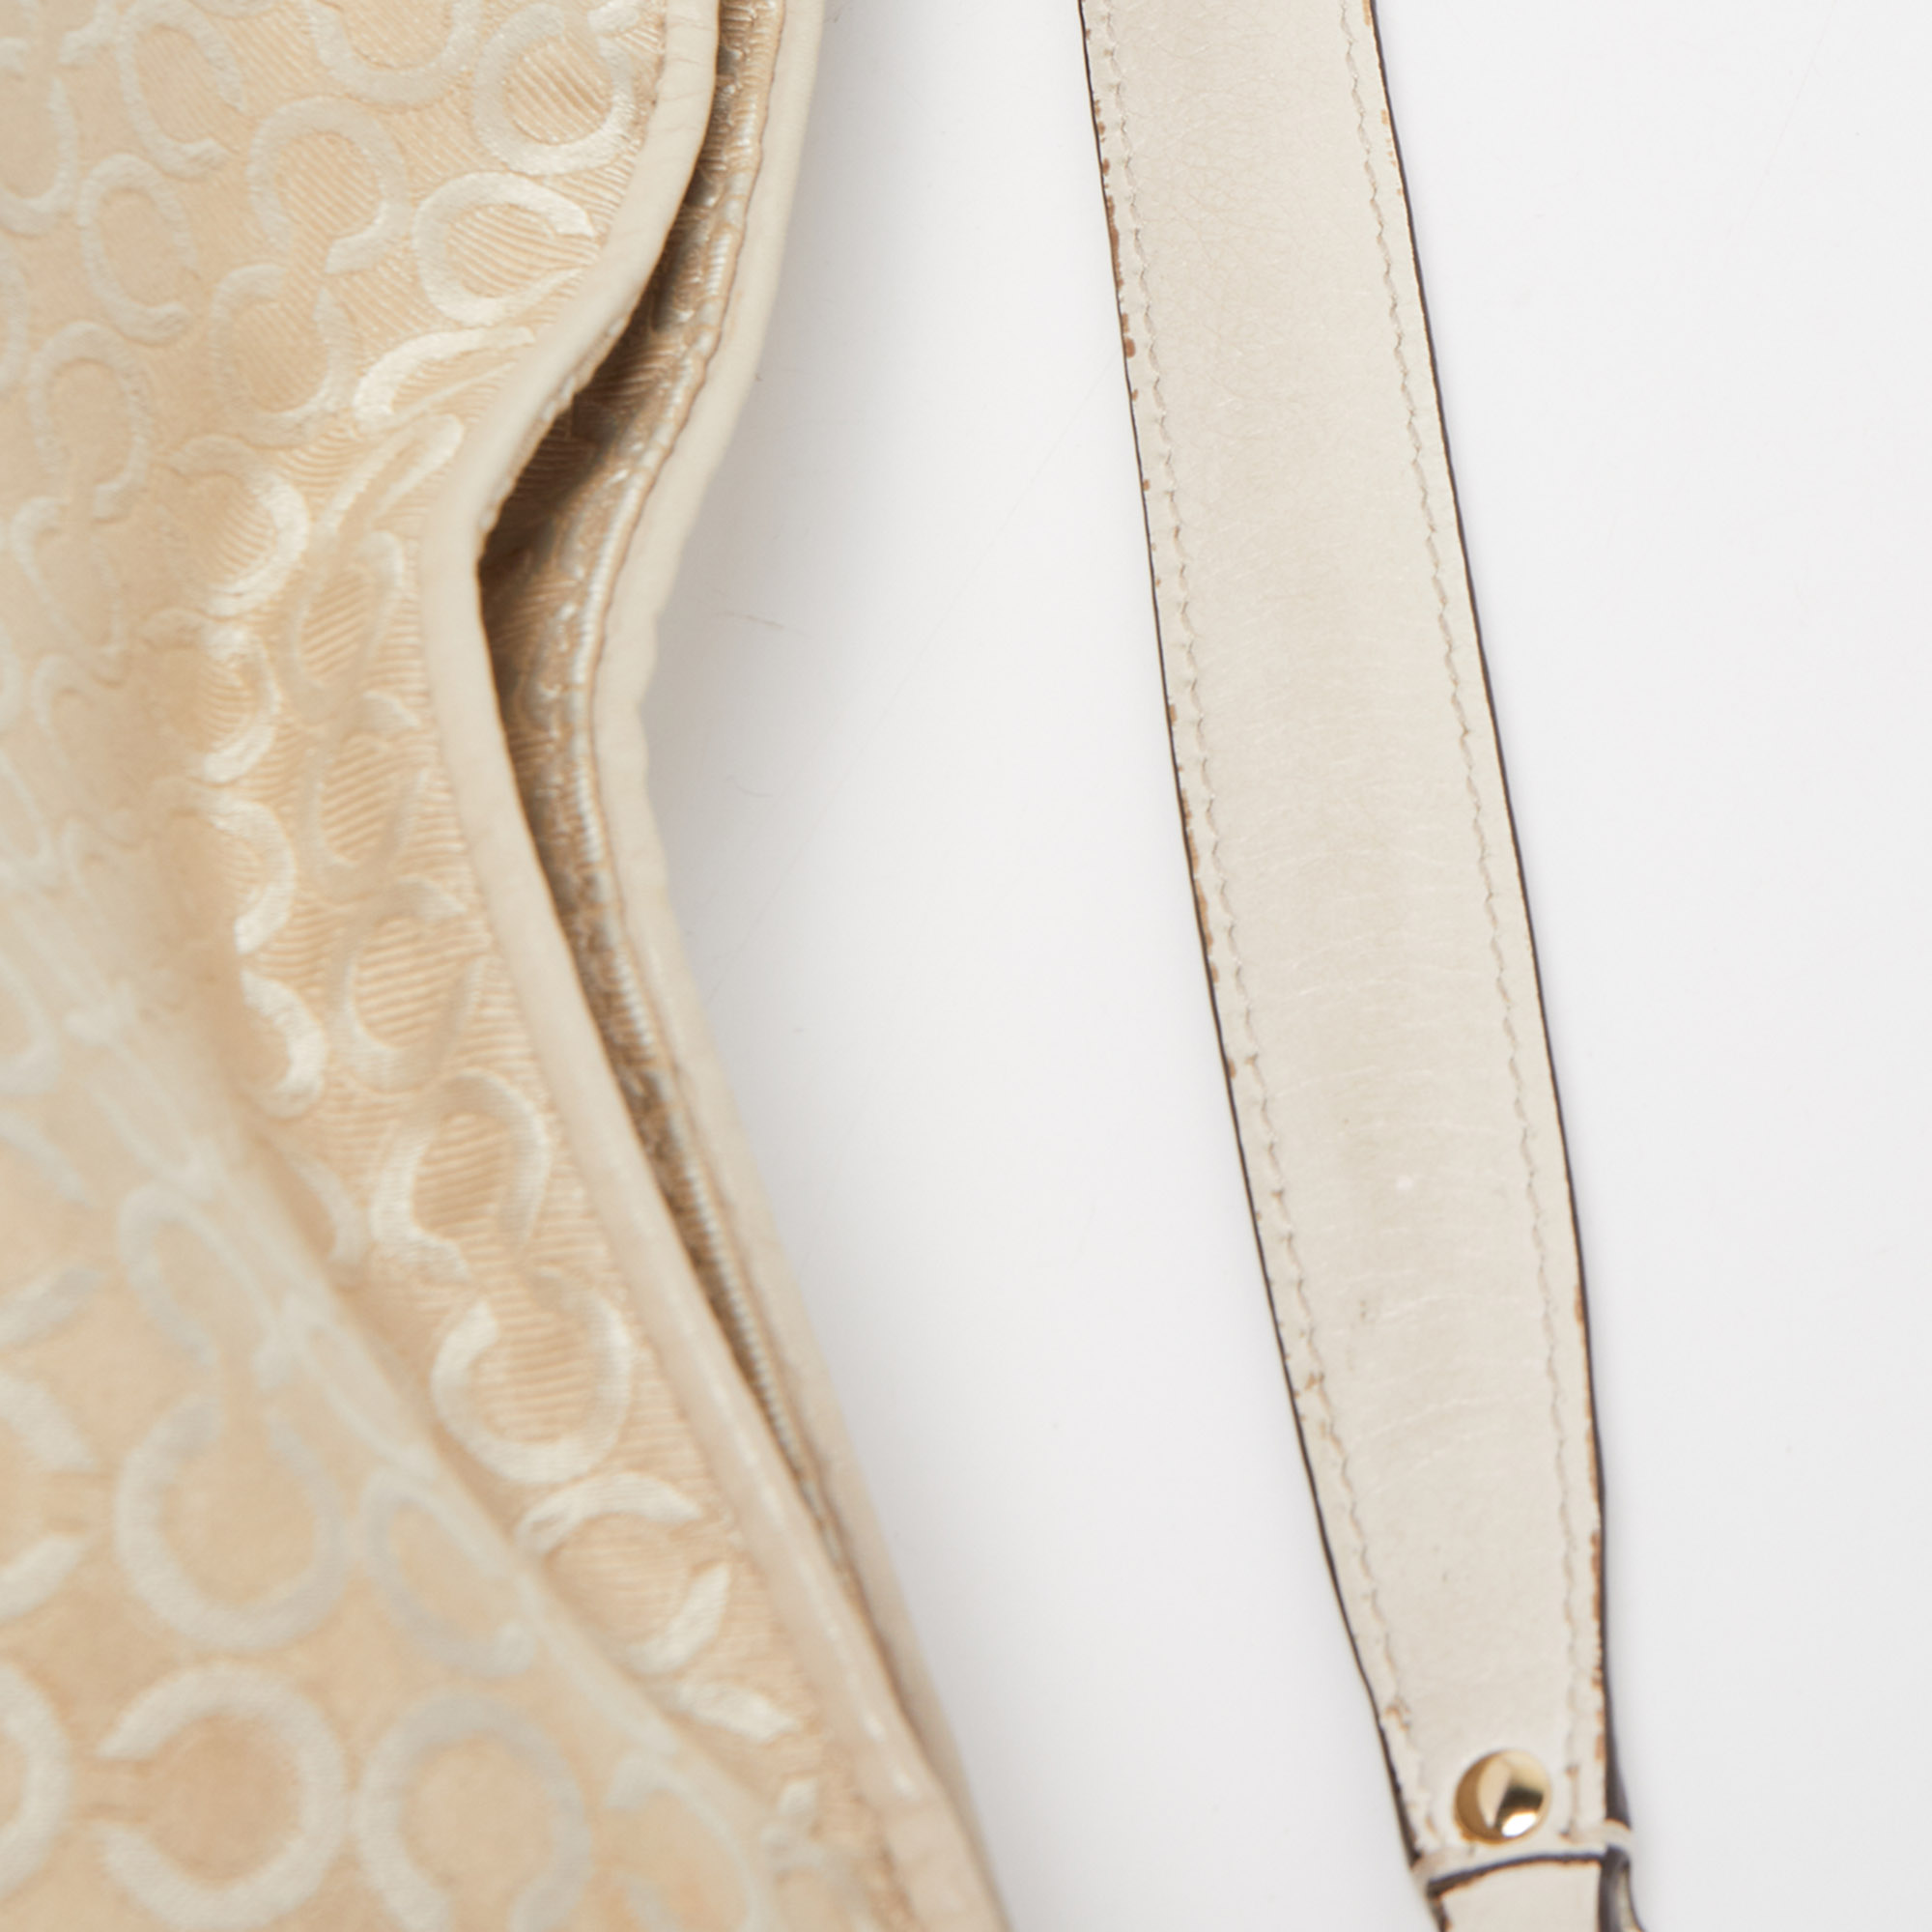 Coach Cream Op Art Fabric And Leather Madison Hobo